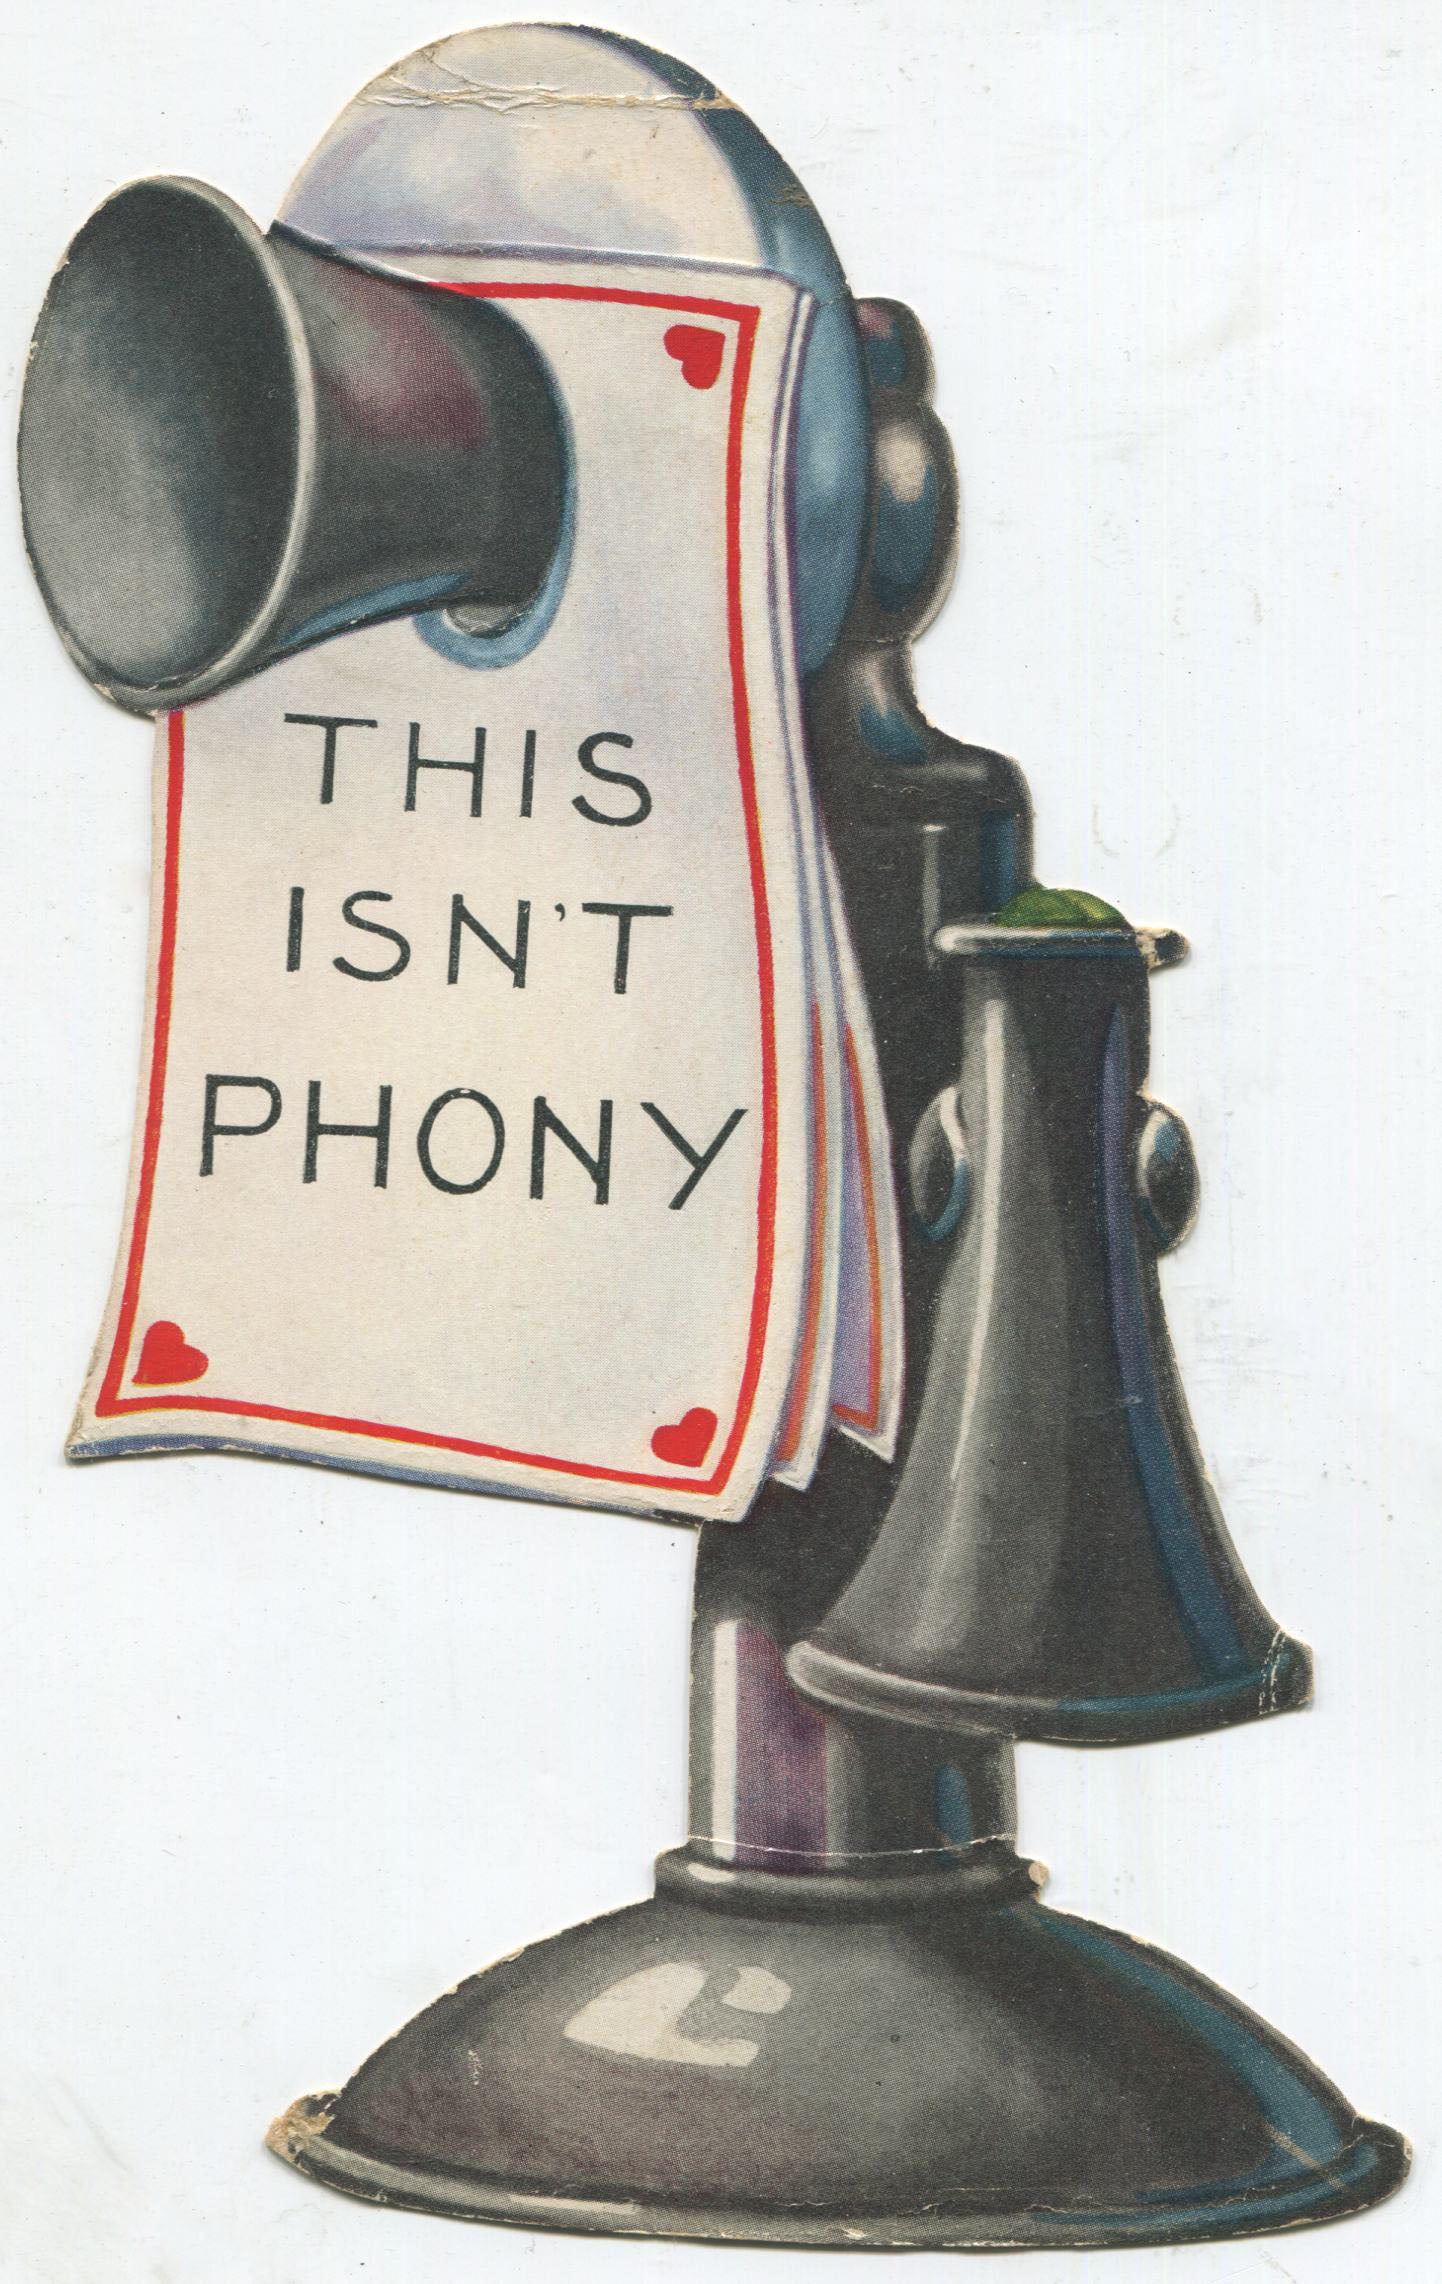 Die Cut Antique Valentine Greeting Card - "This Isn't Phony" - 4" x 7.5"